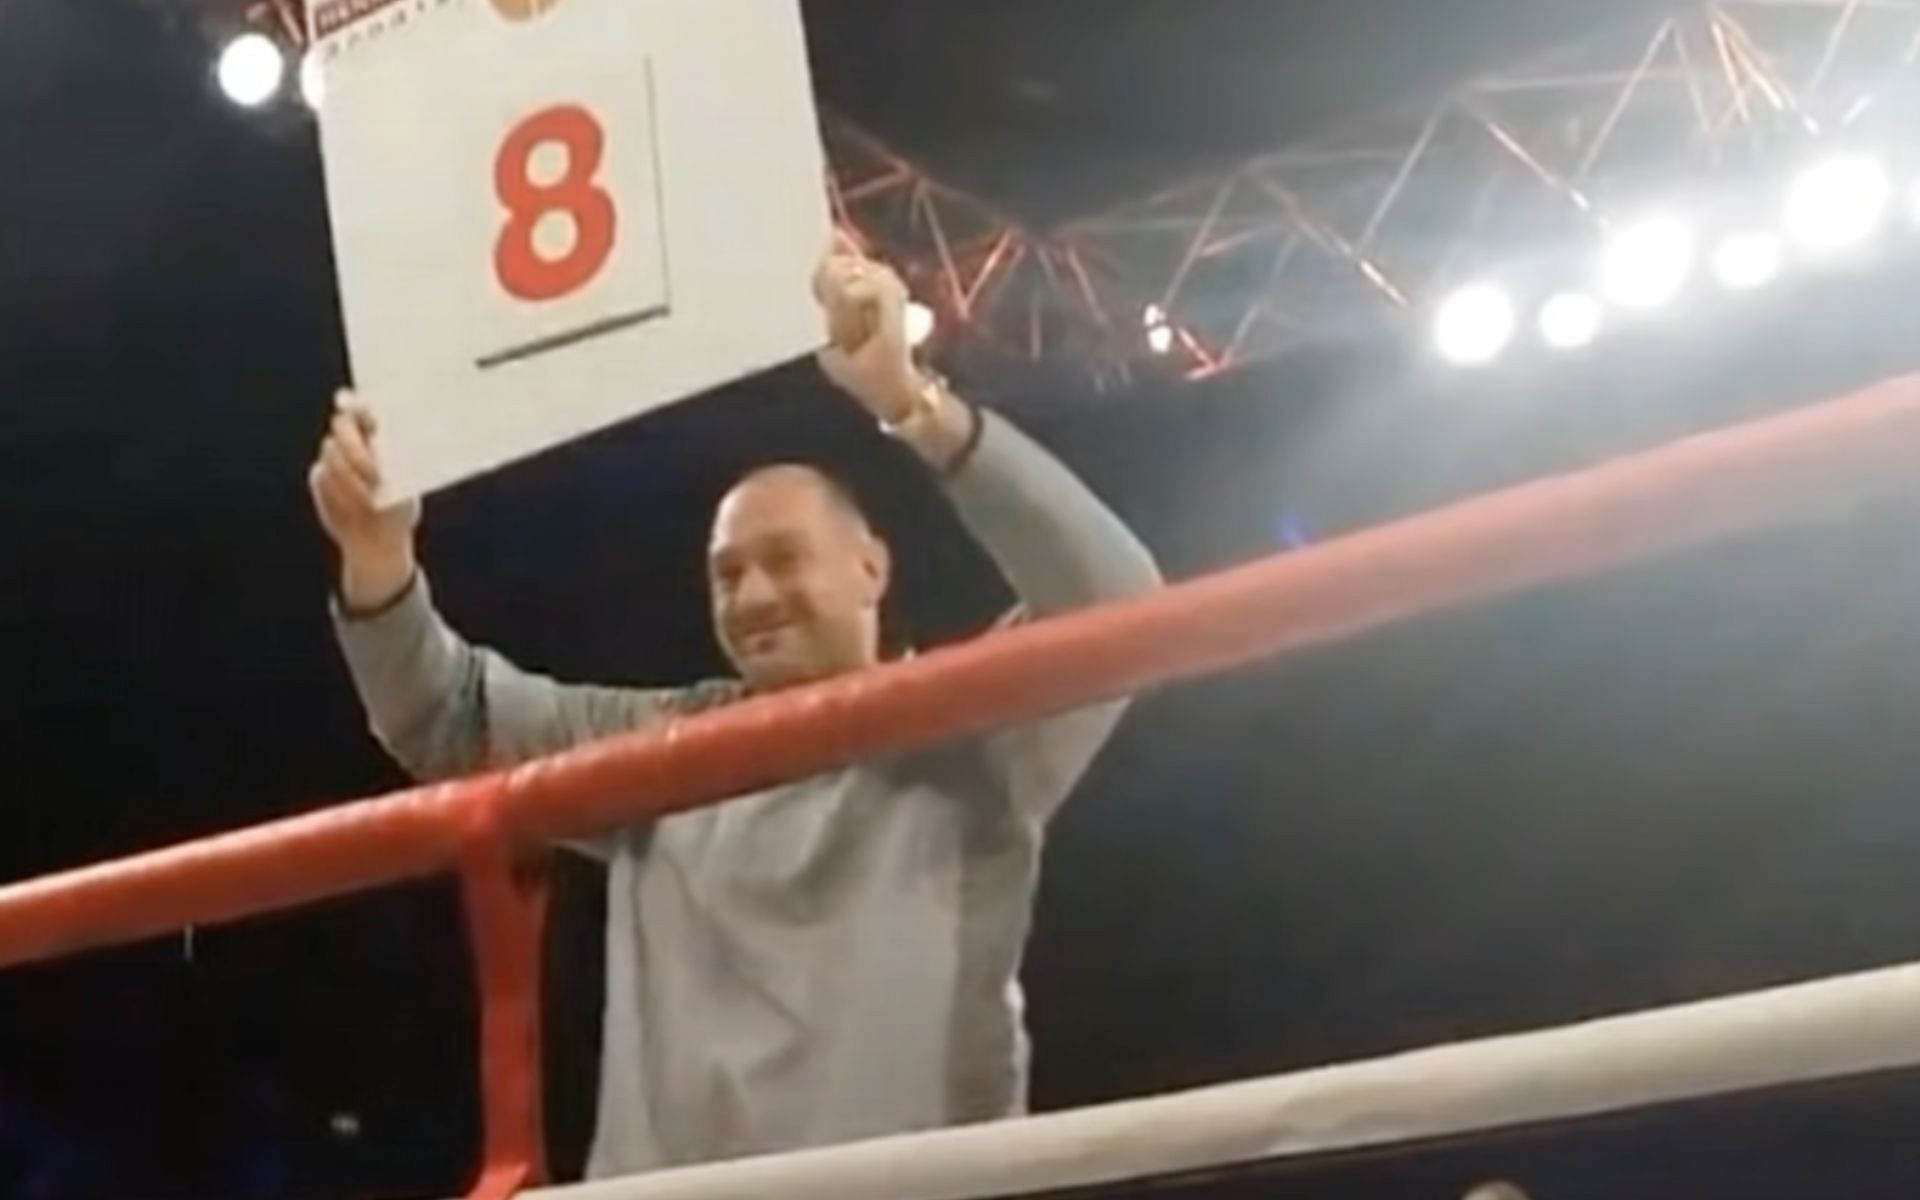 Tyson Fury posing as a ring girl at Wembley Arena (Image Courtesy - @SheldanKeay on X/Twitter)